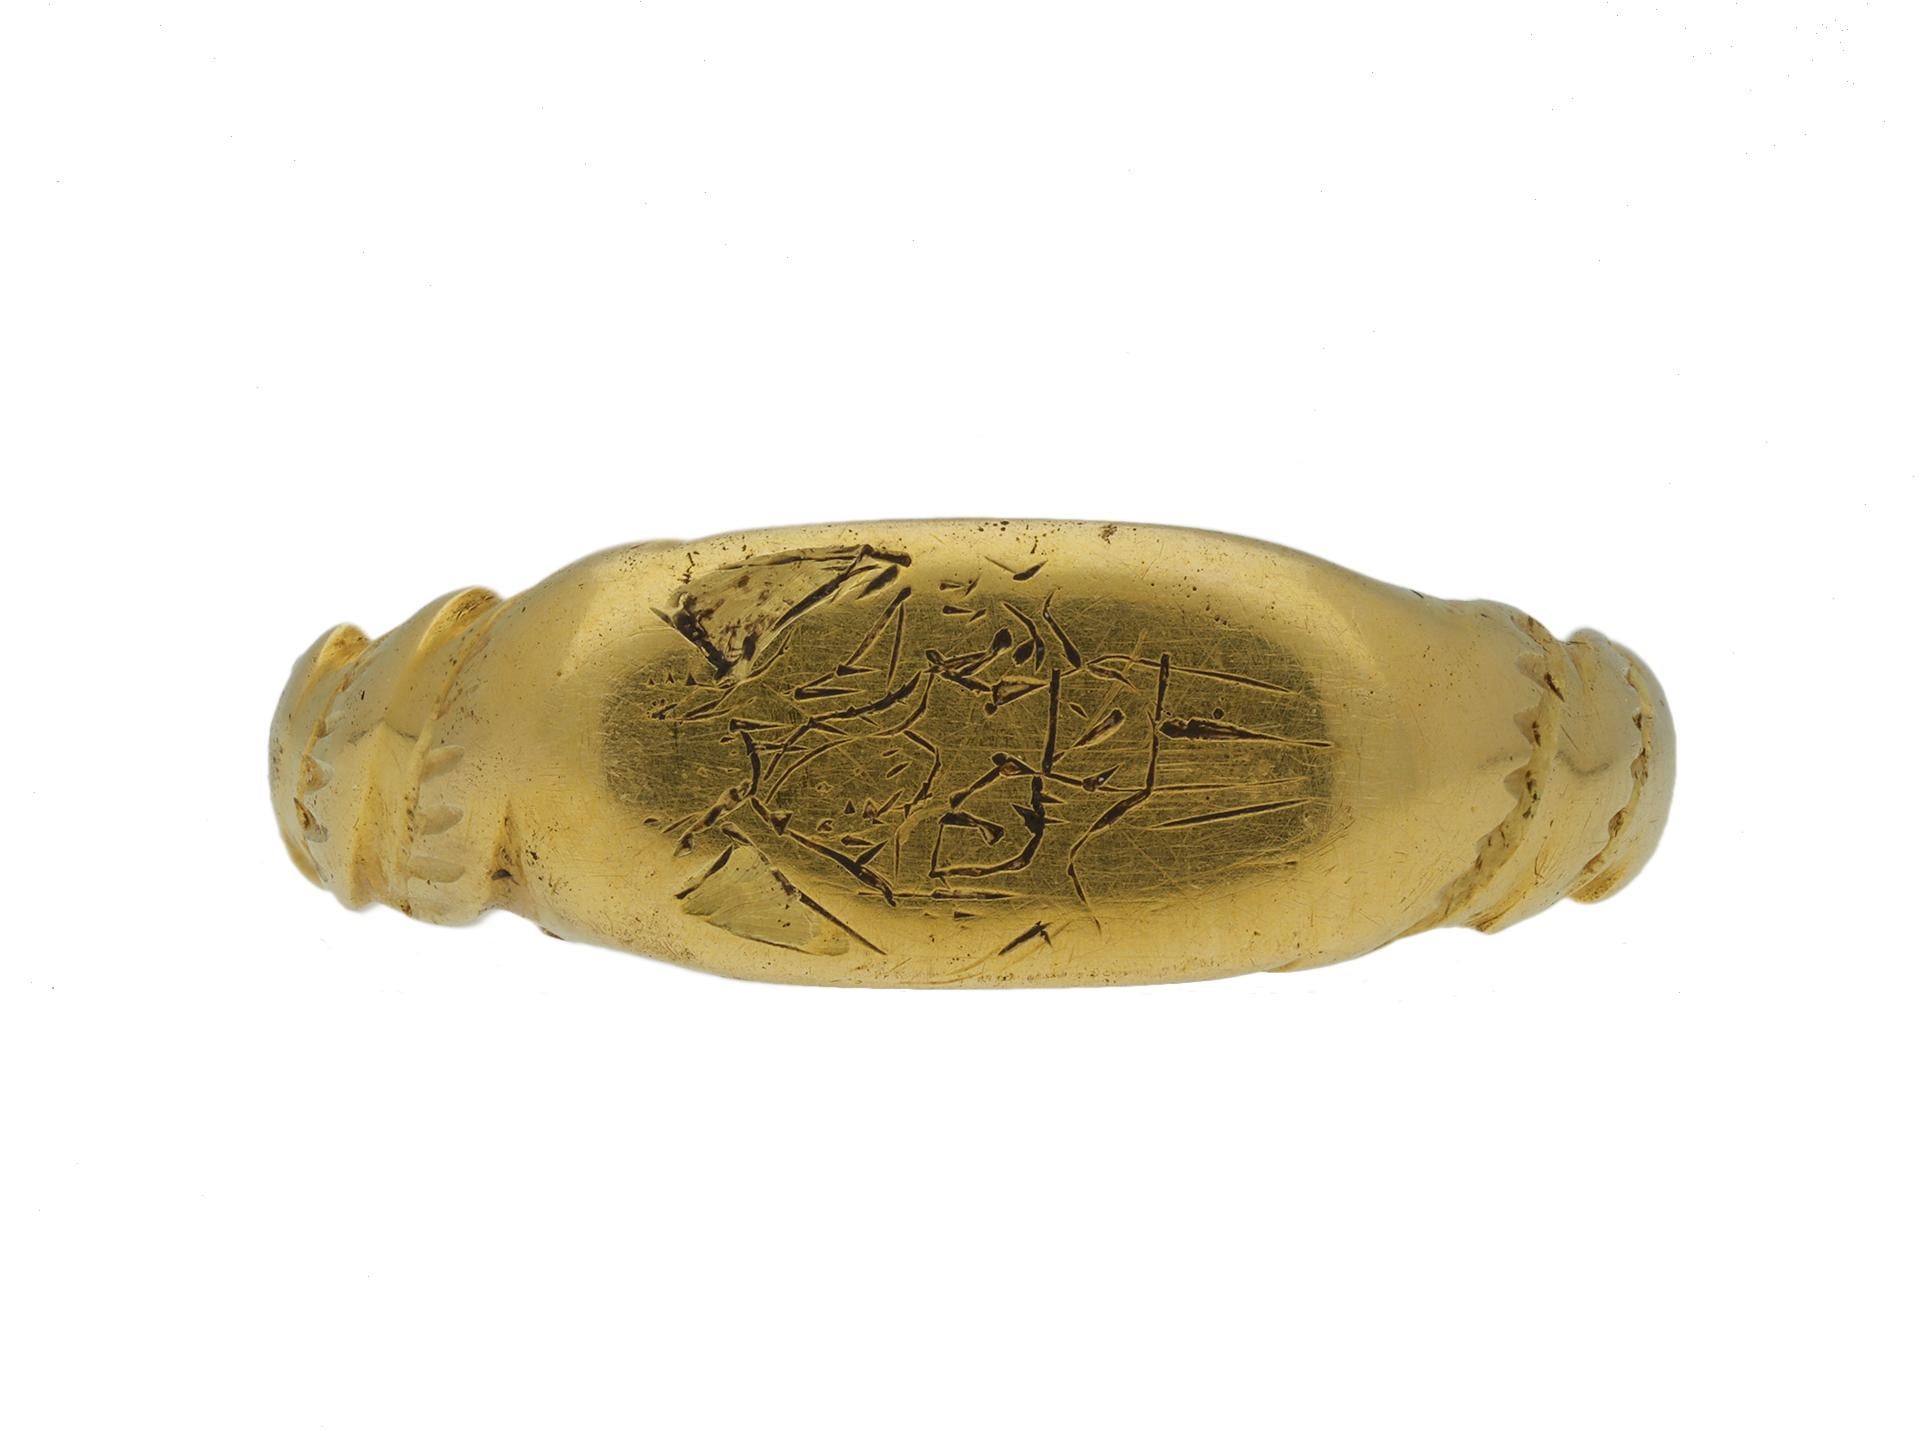 Medieval iconographic ring with the holy trinity. A yellow gold ring with an oval bezel finely engraved with a religious scene featuring the holy trinity with a crucified Jesus in the centre, God the father behind and above, his arms supporting